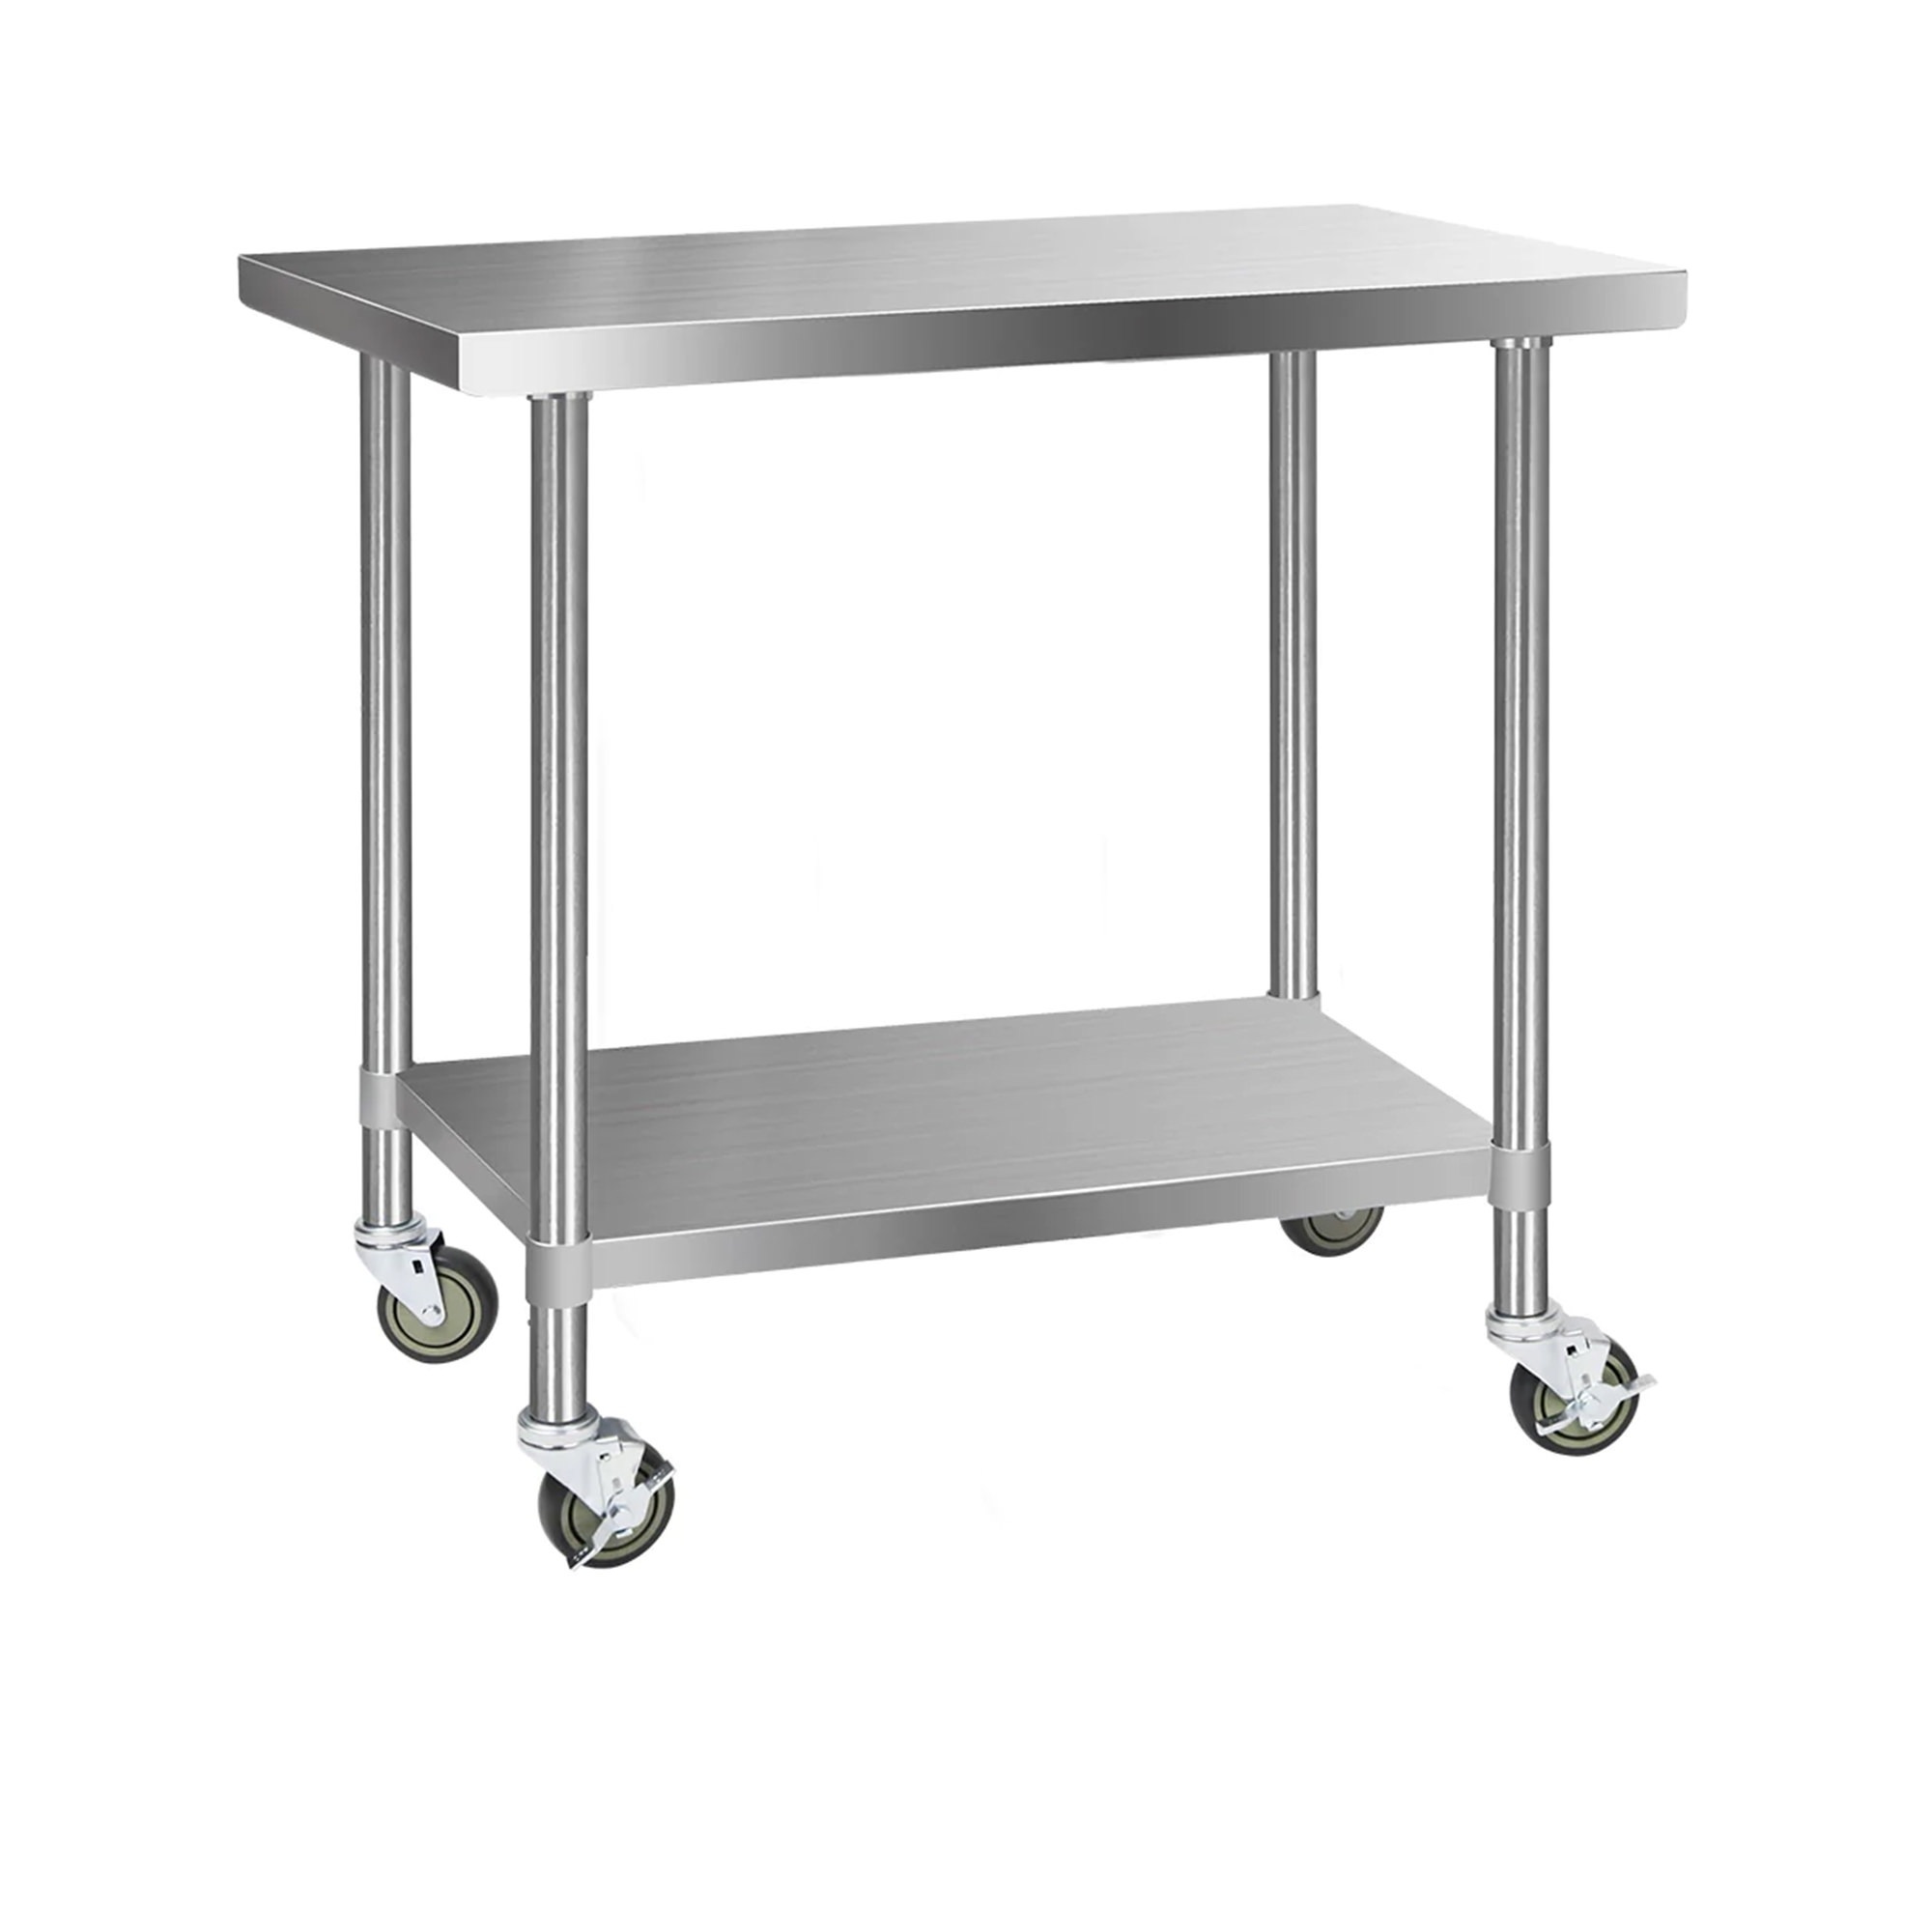 Cefito 430 Stainless Steel Kitchen Bench with Wheels 121.9x61cm Image 1